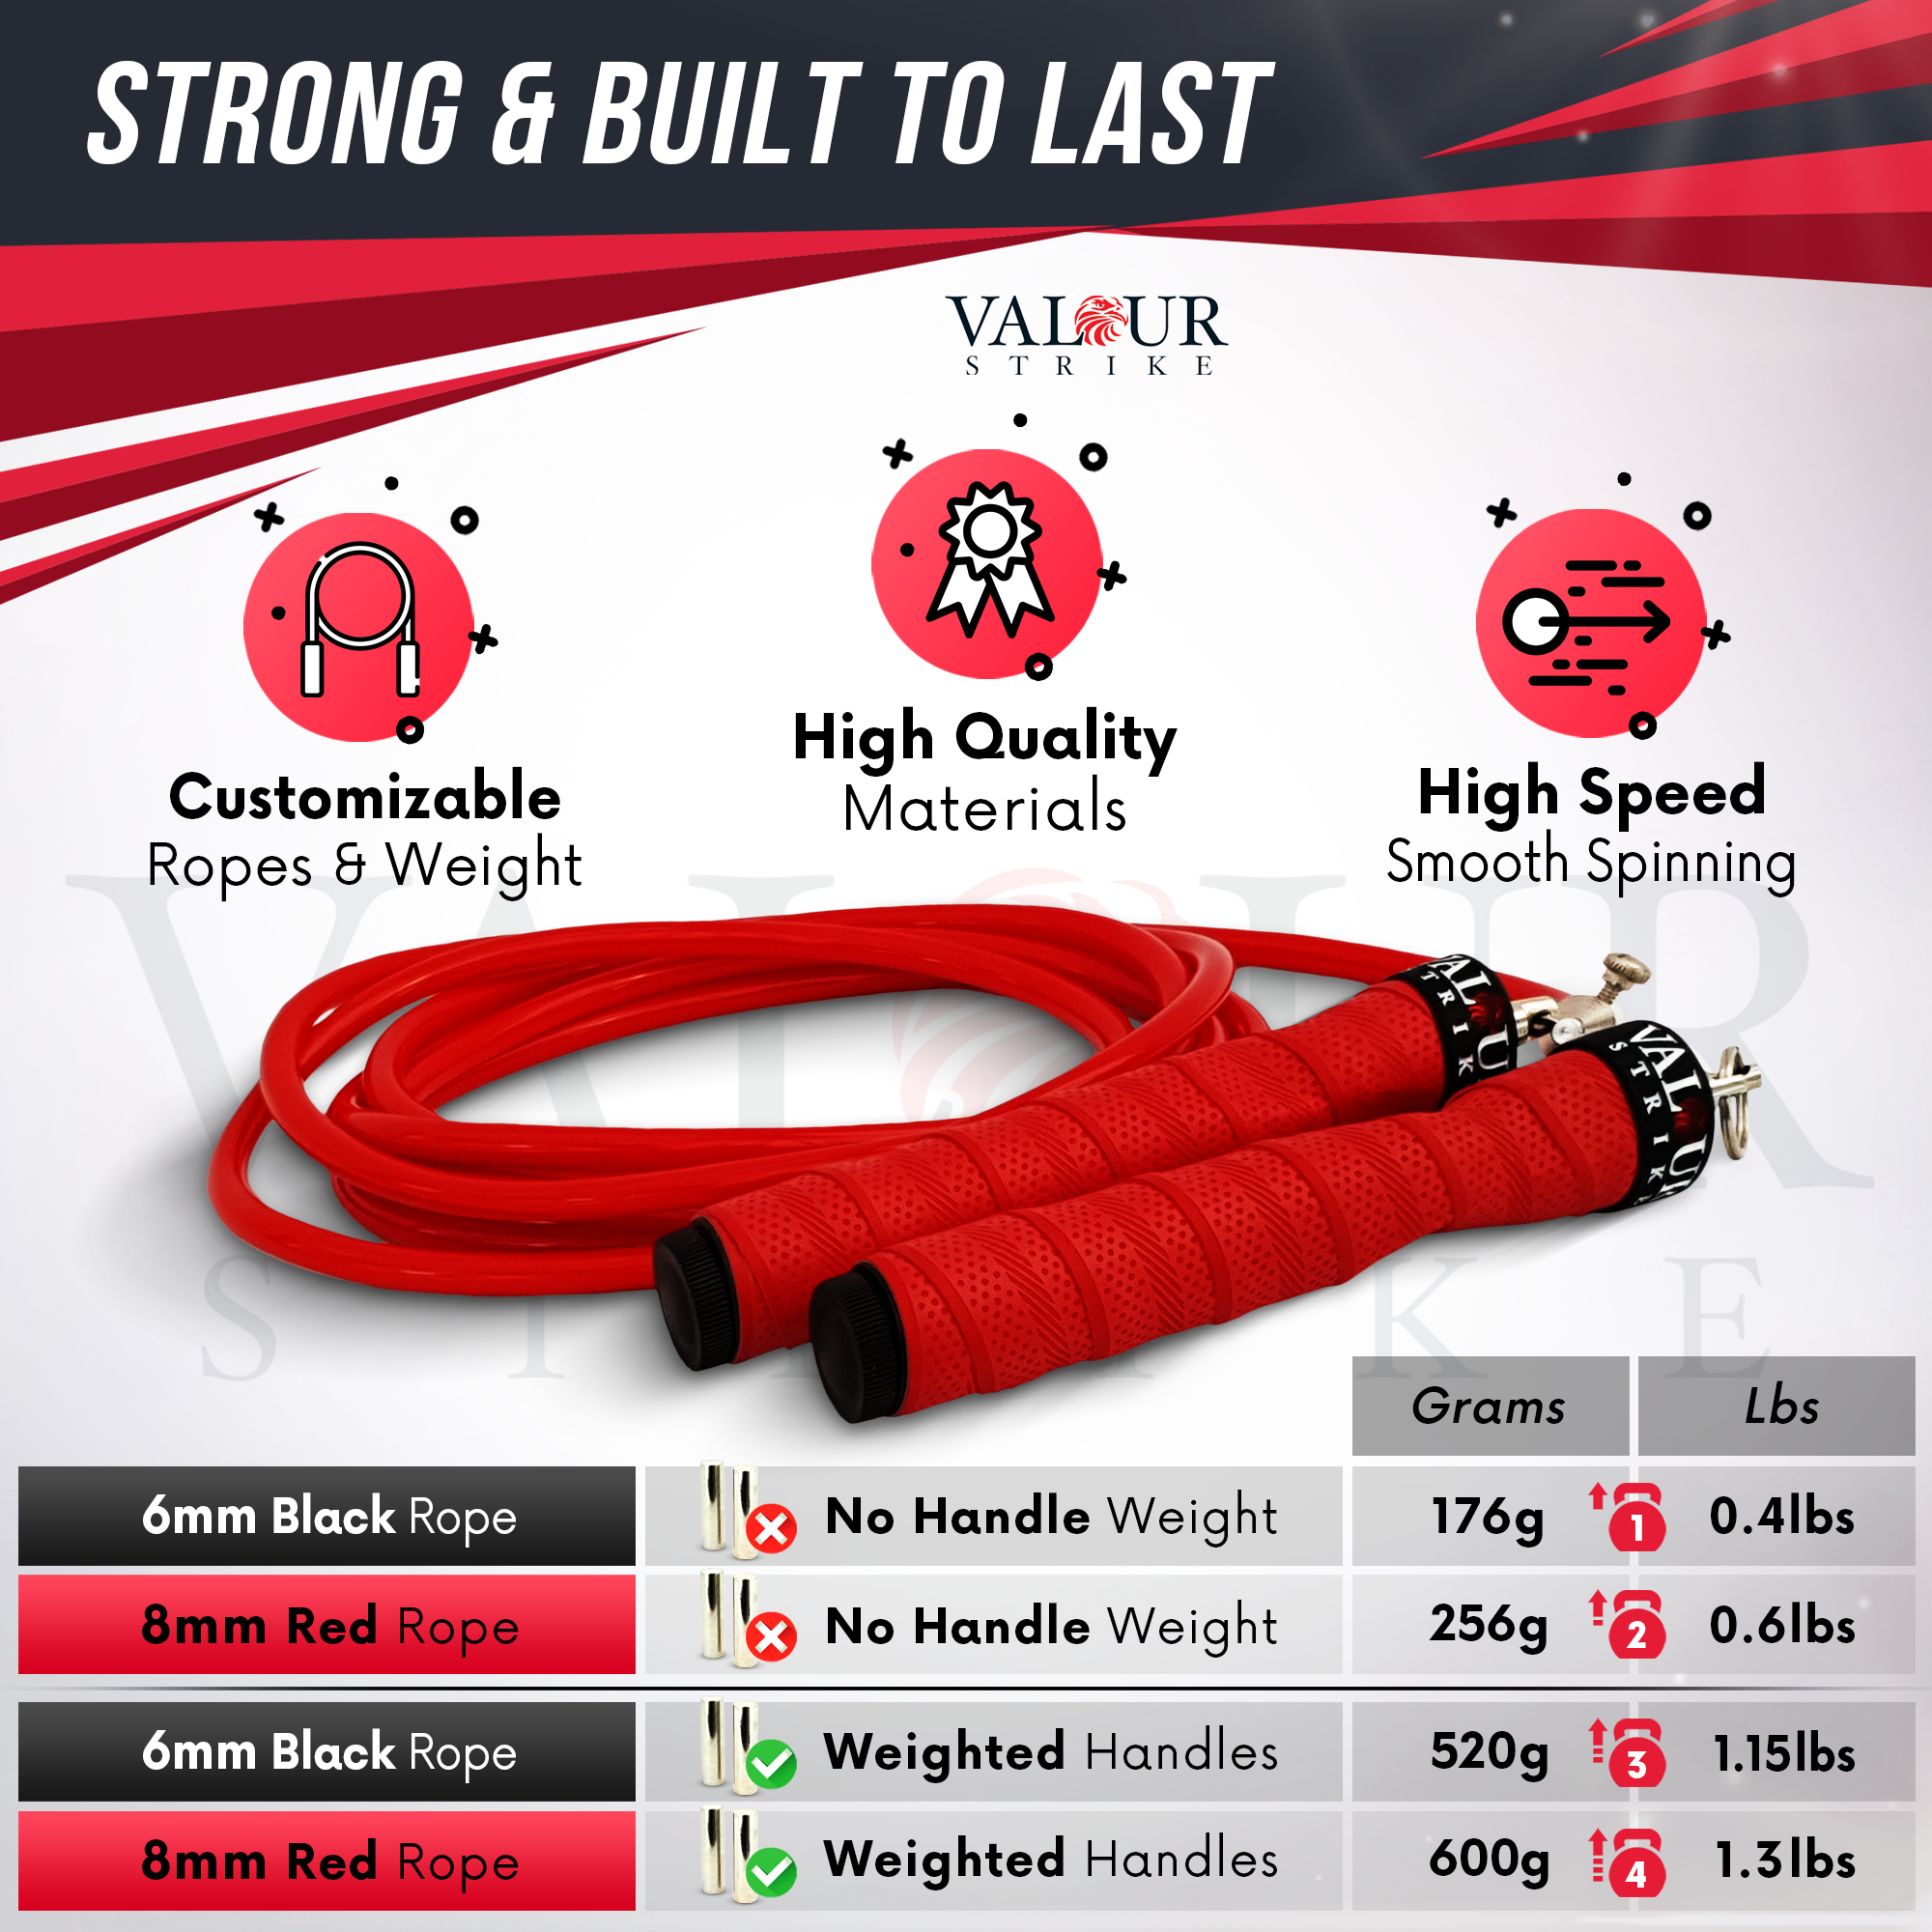 4 weight variations of skipping ropes